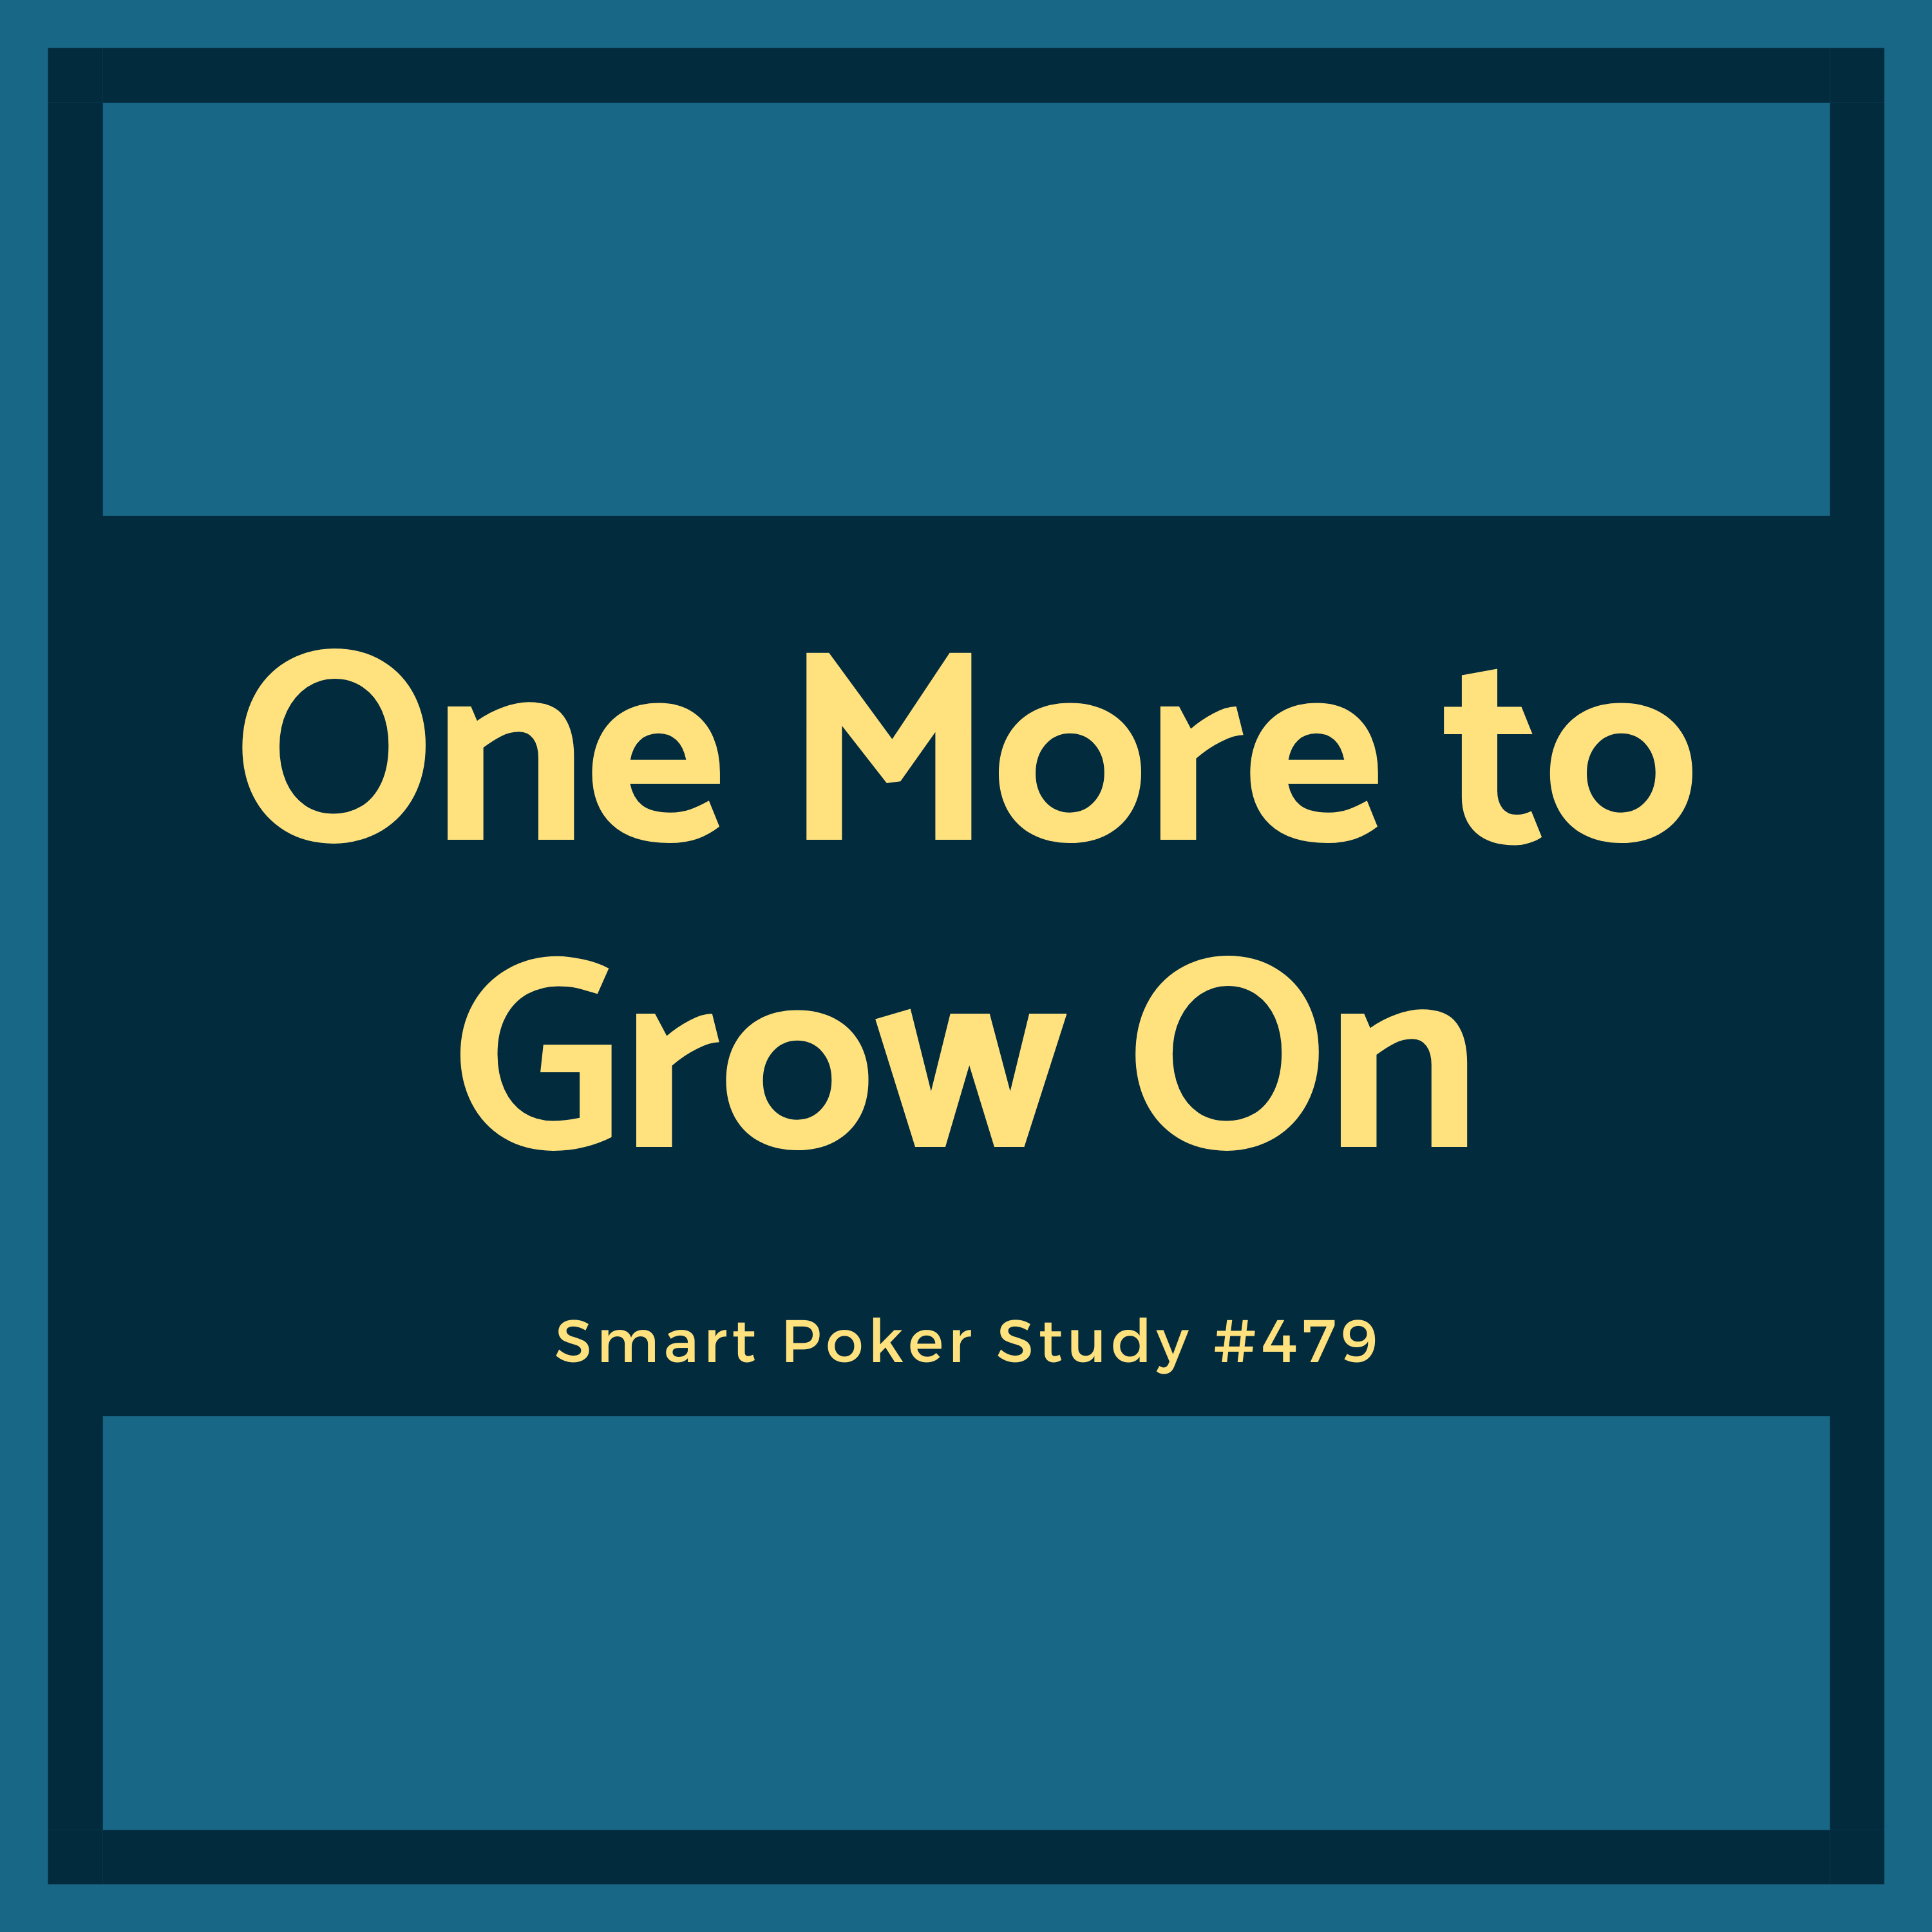 Accelerate Your Poker Skill Growth Today - "One More To Grow On" #479